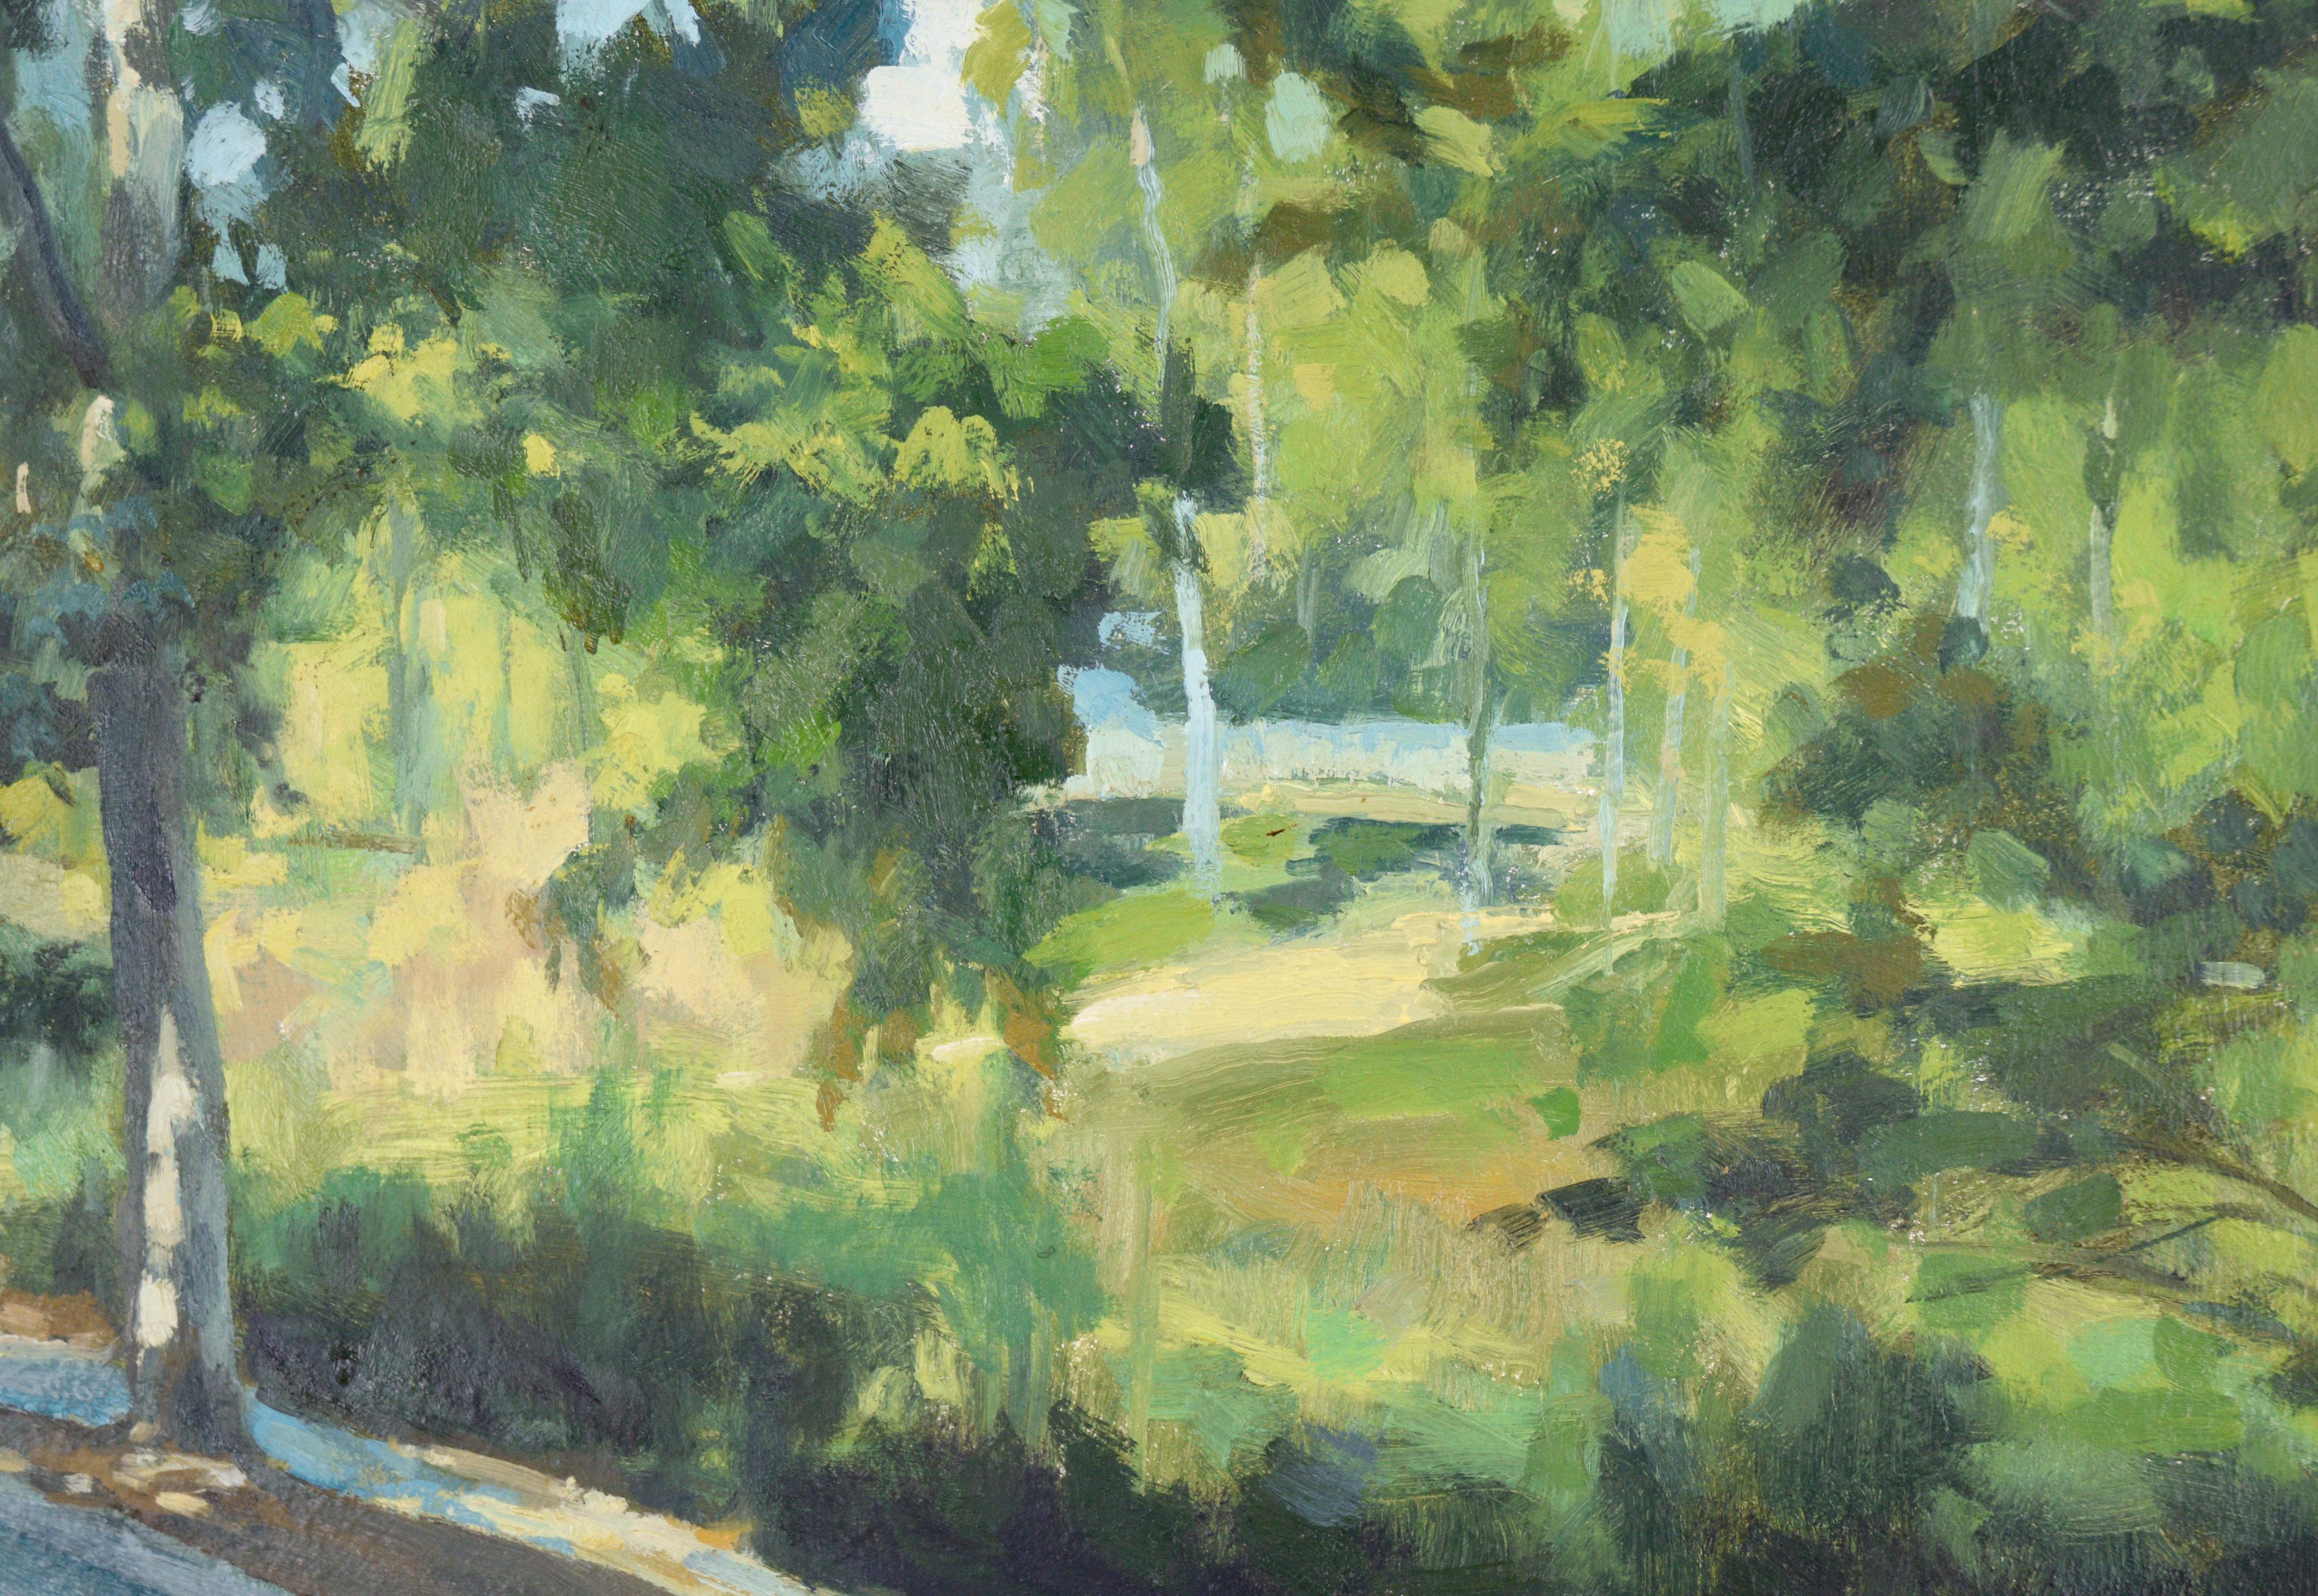 Sidewalk Along the Park - Landscape in Oil on Canvas - Gray Landscape Painting by Gholam Yunessi